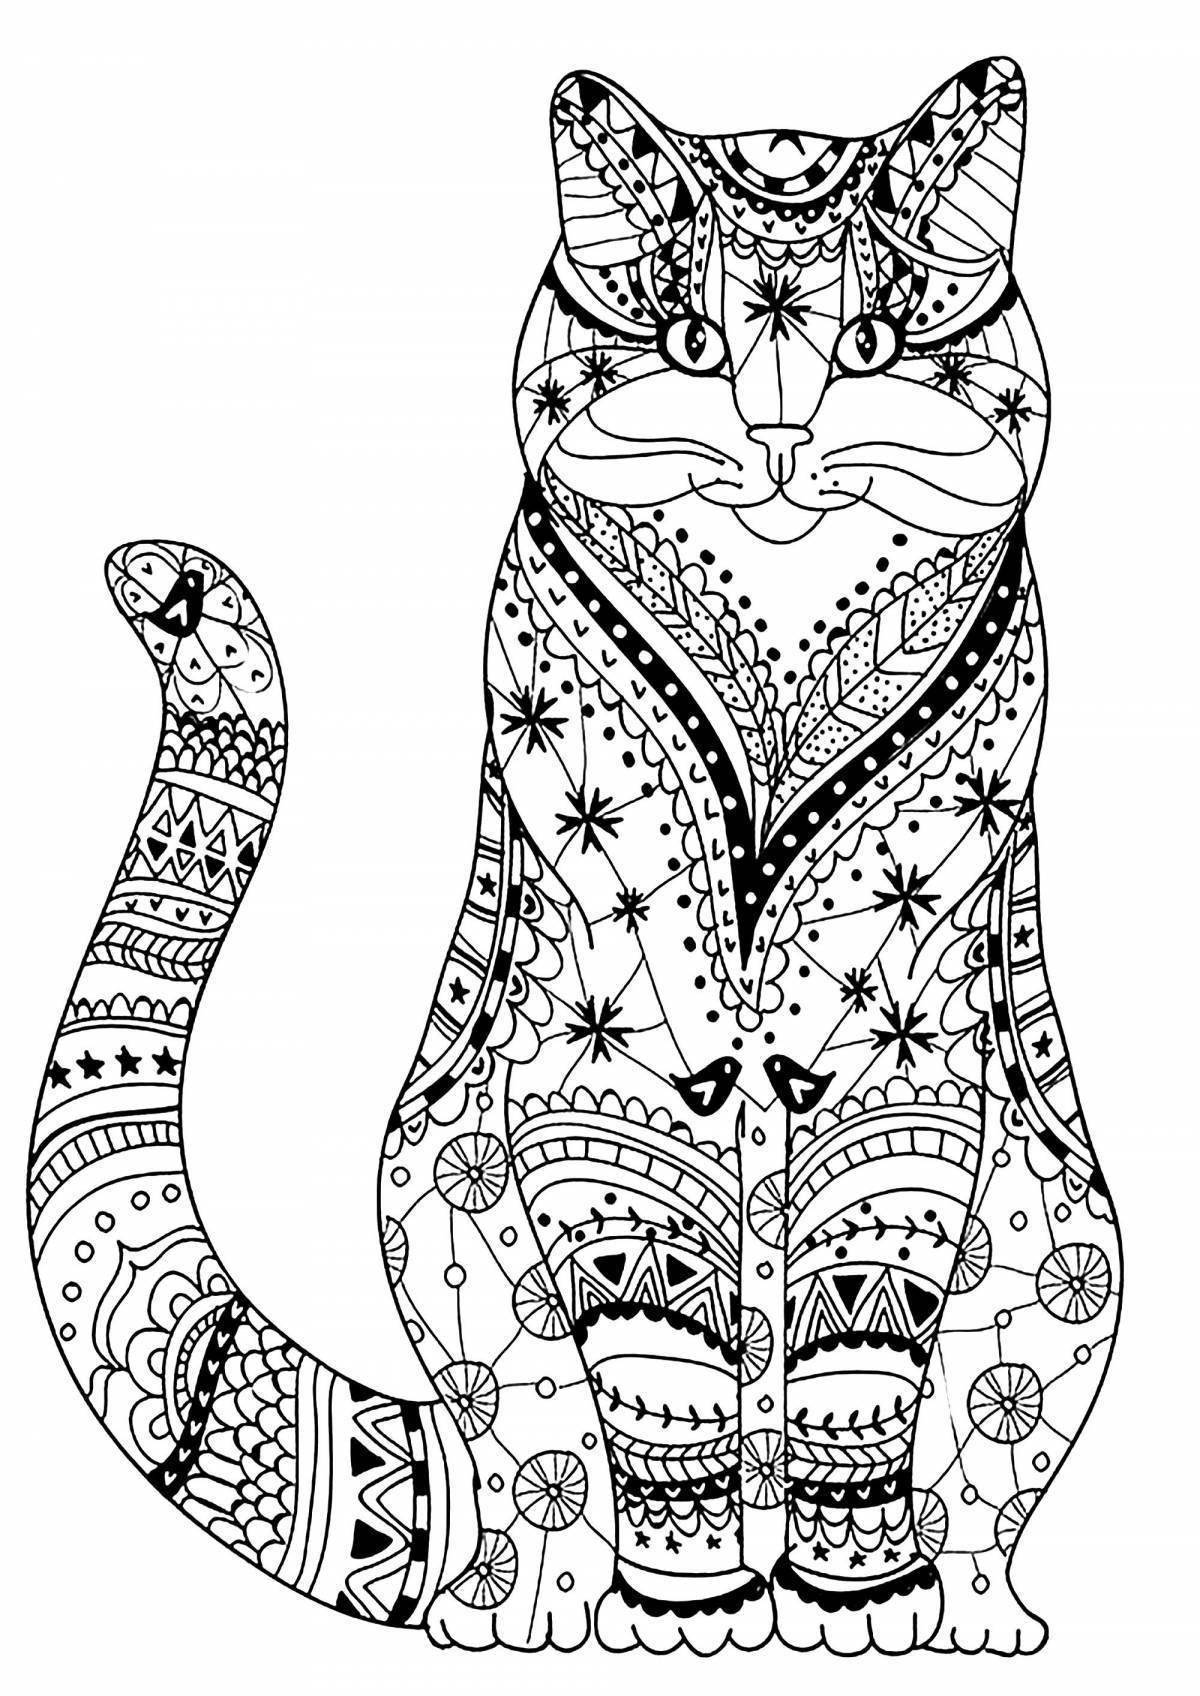 Refreshing cat anti-stress coloring page